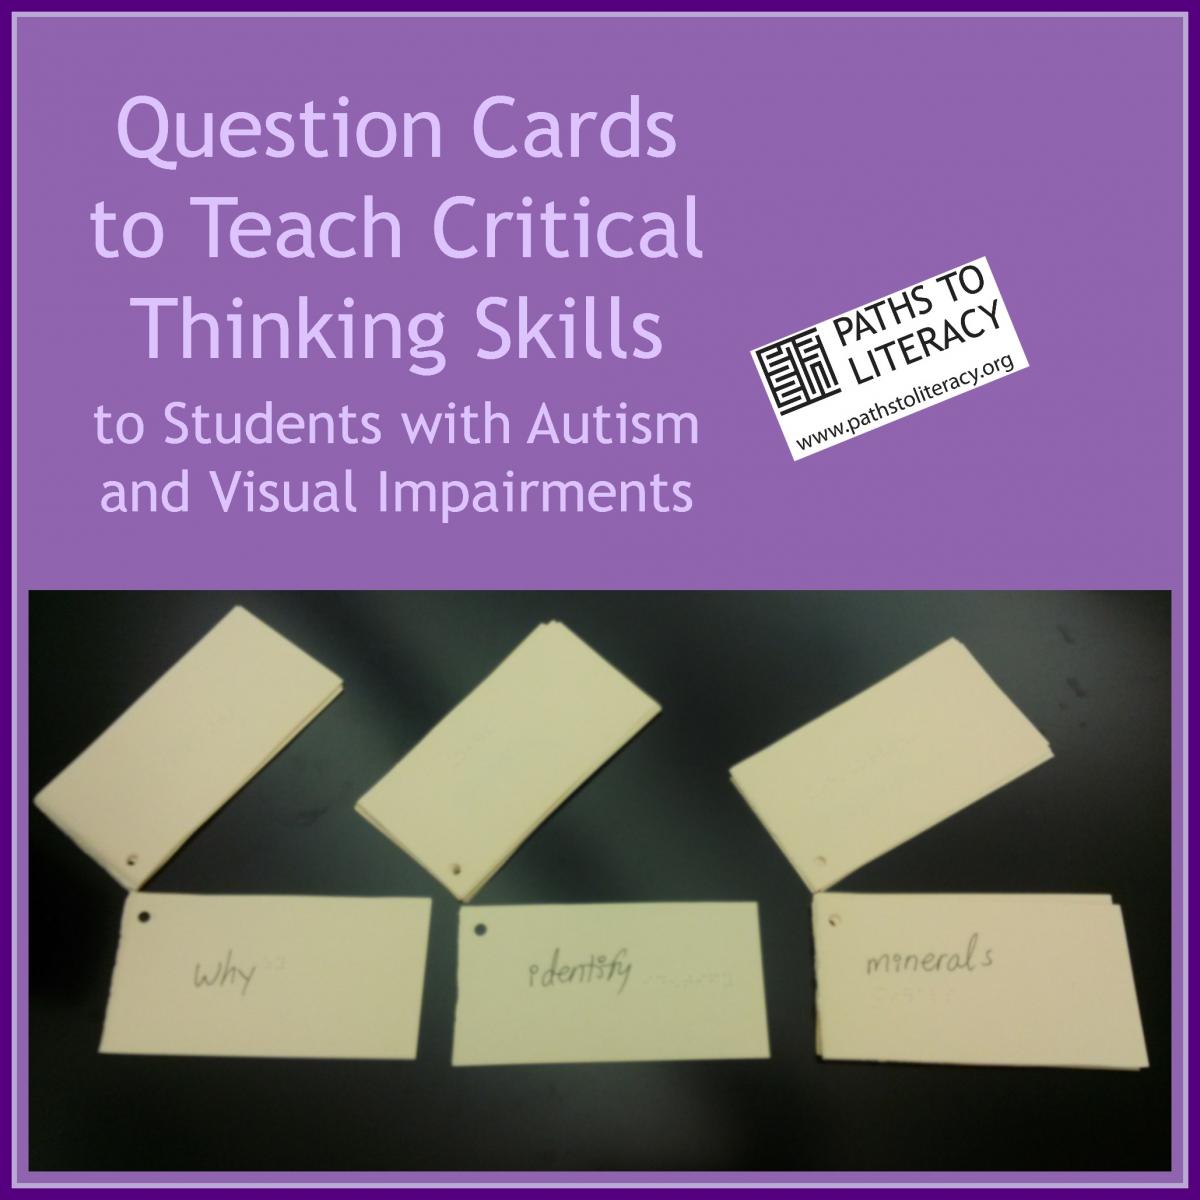 Question cards to teach critical thinking skills to students with autism and visual impairment